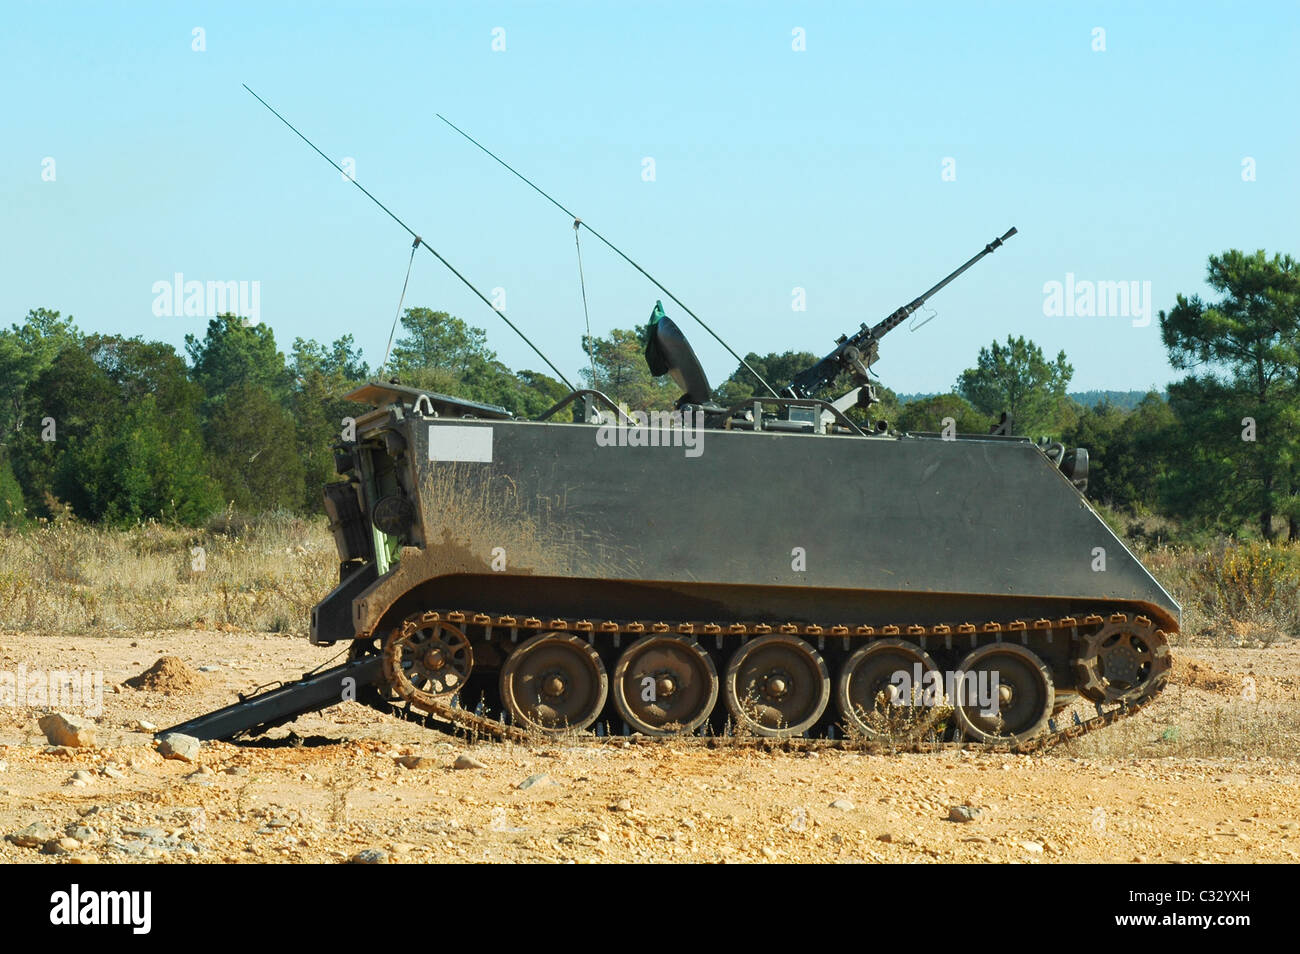 M113 Armored Personnel Carrier vehicle Stock Photo